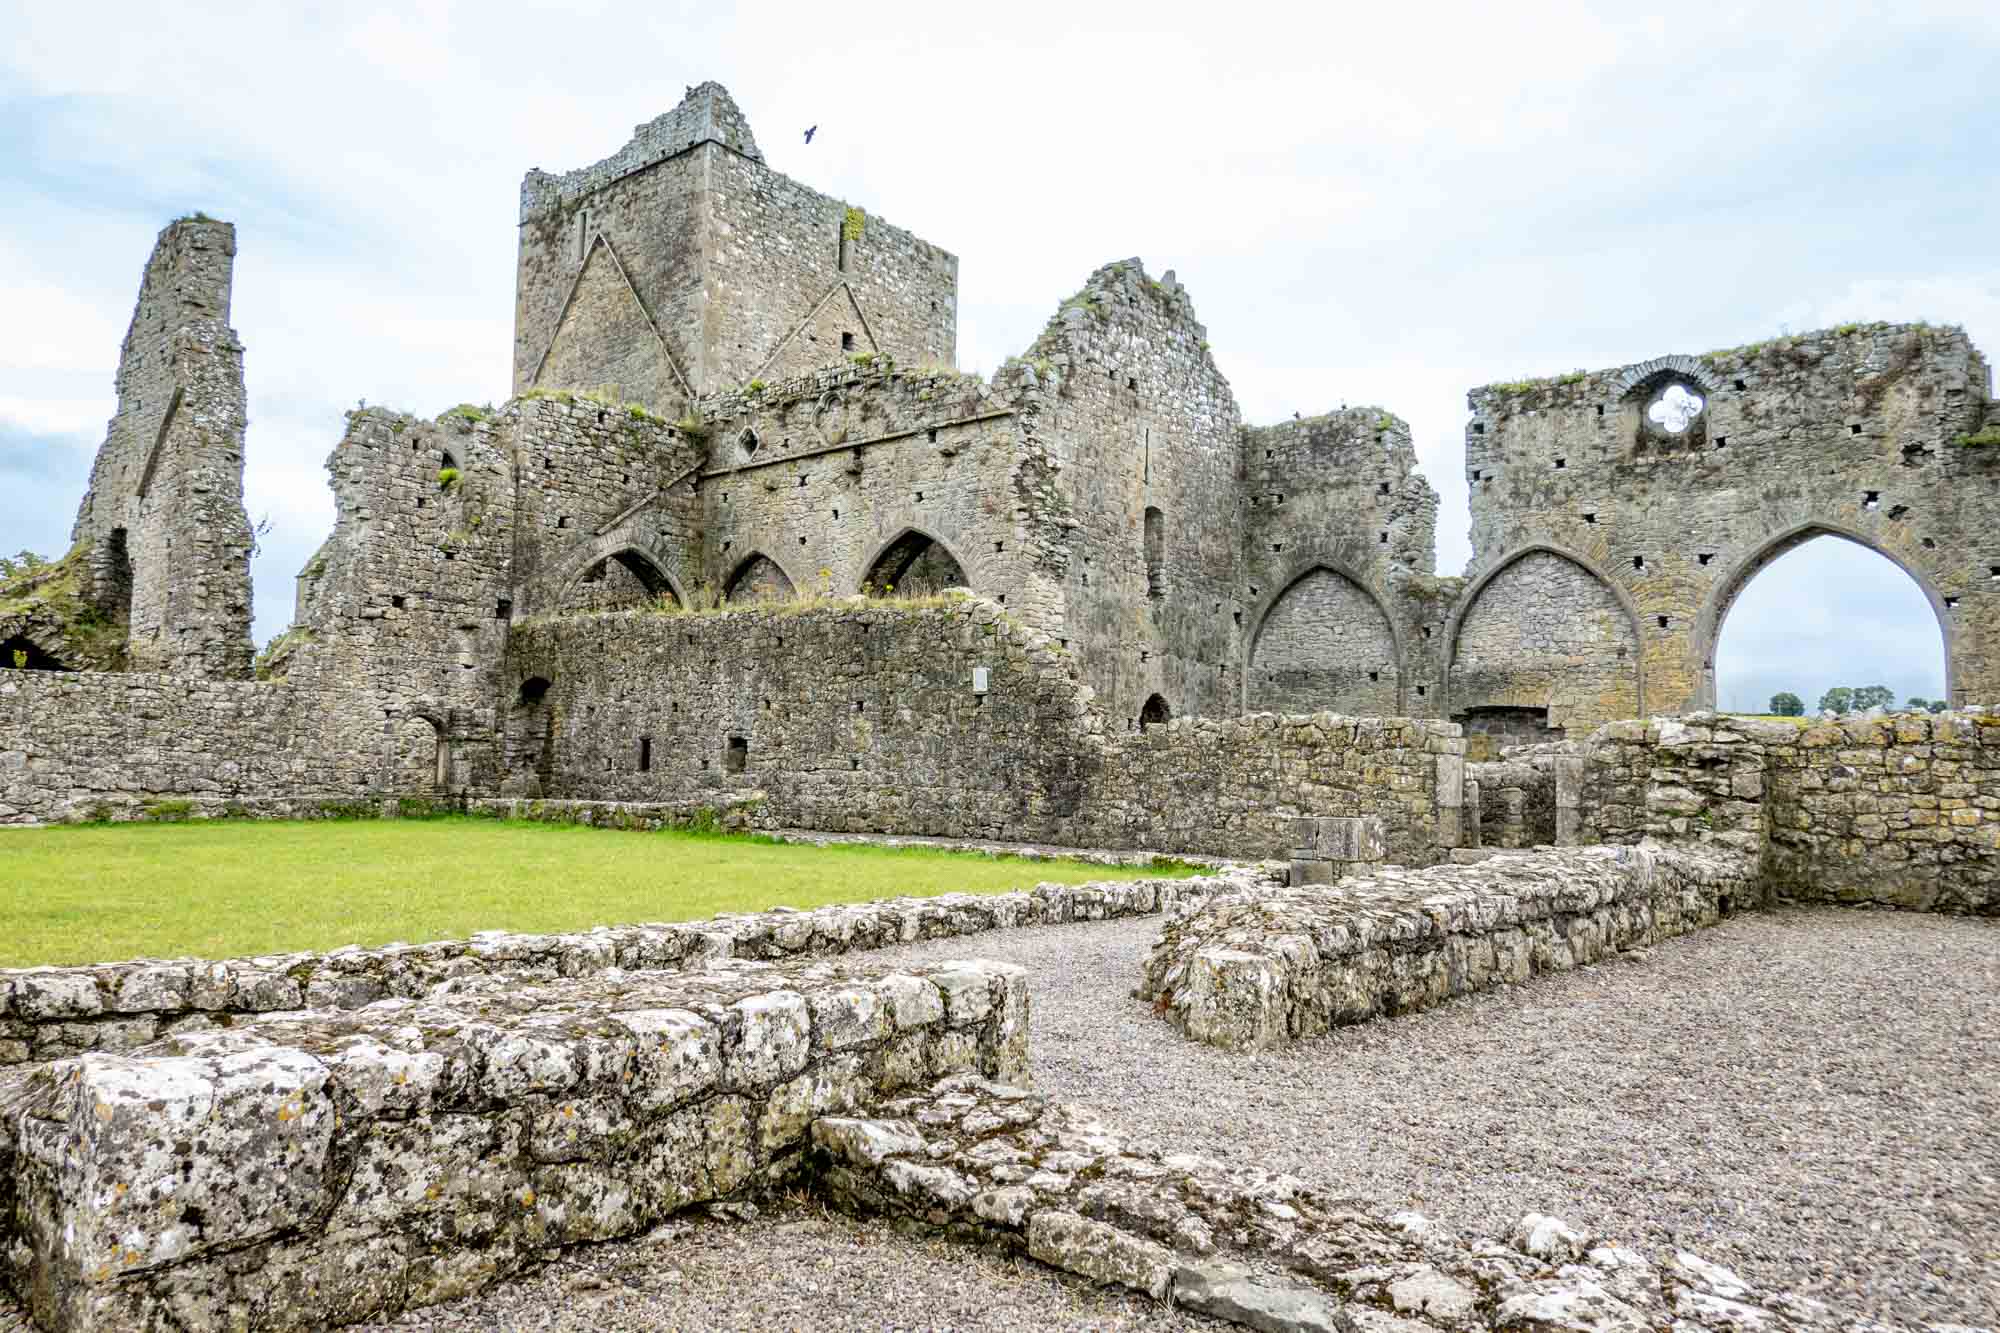 Stone ruins of a medieval abbey